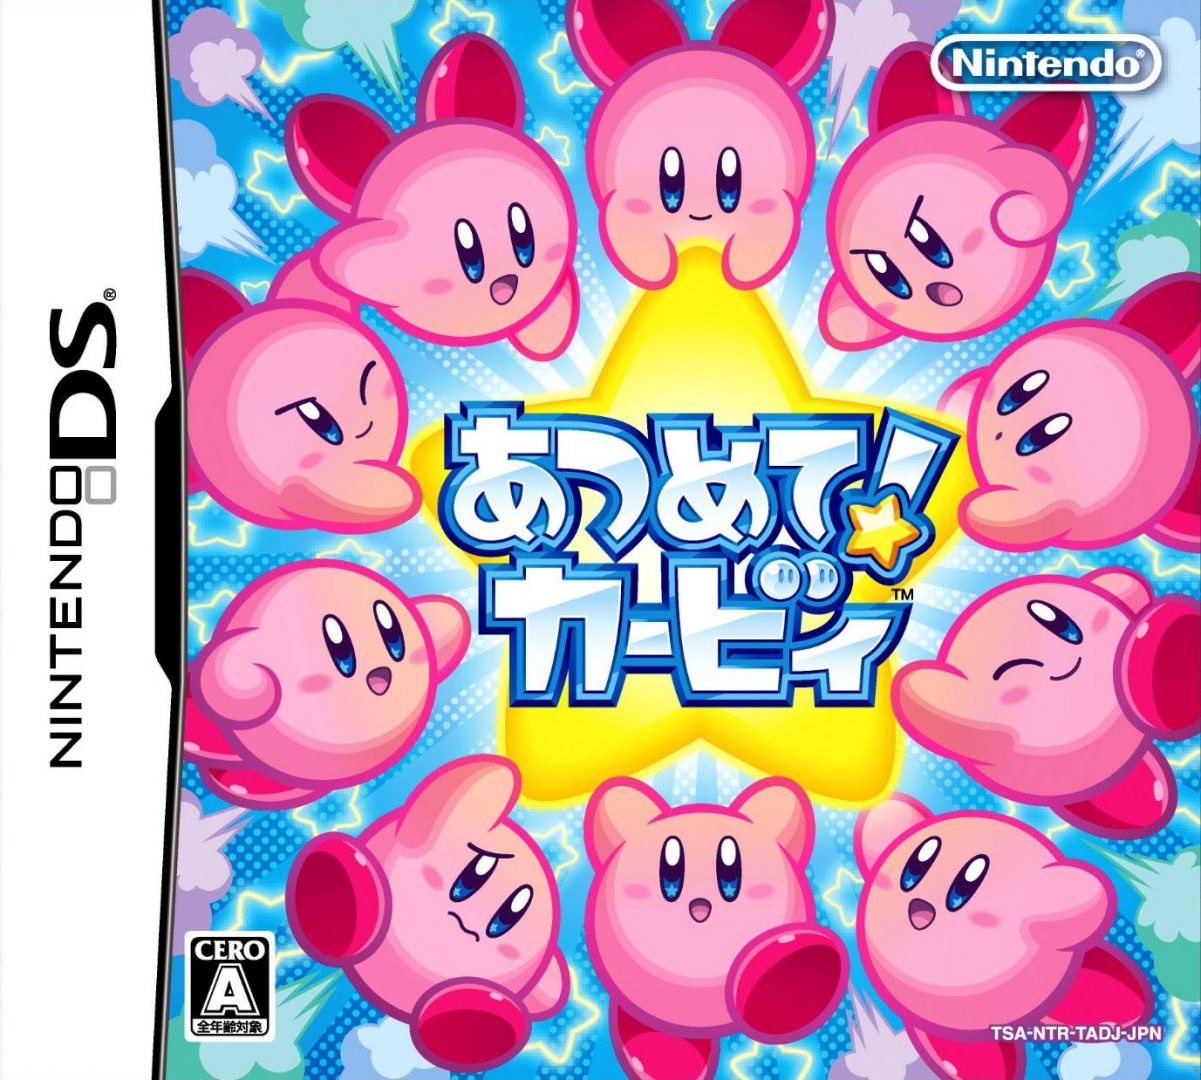 The coverart image of Atsumete! Kirby